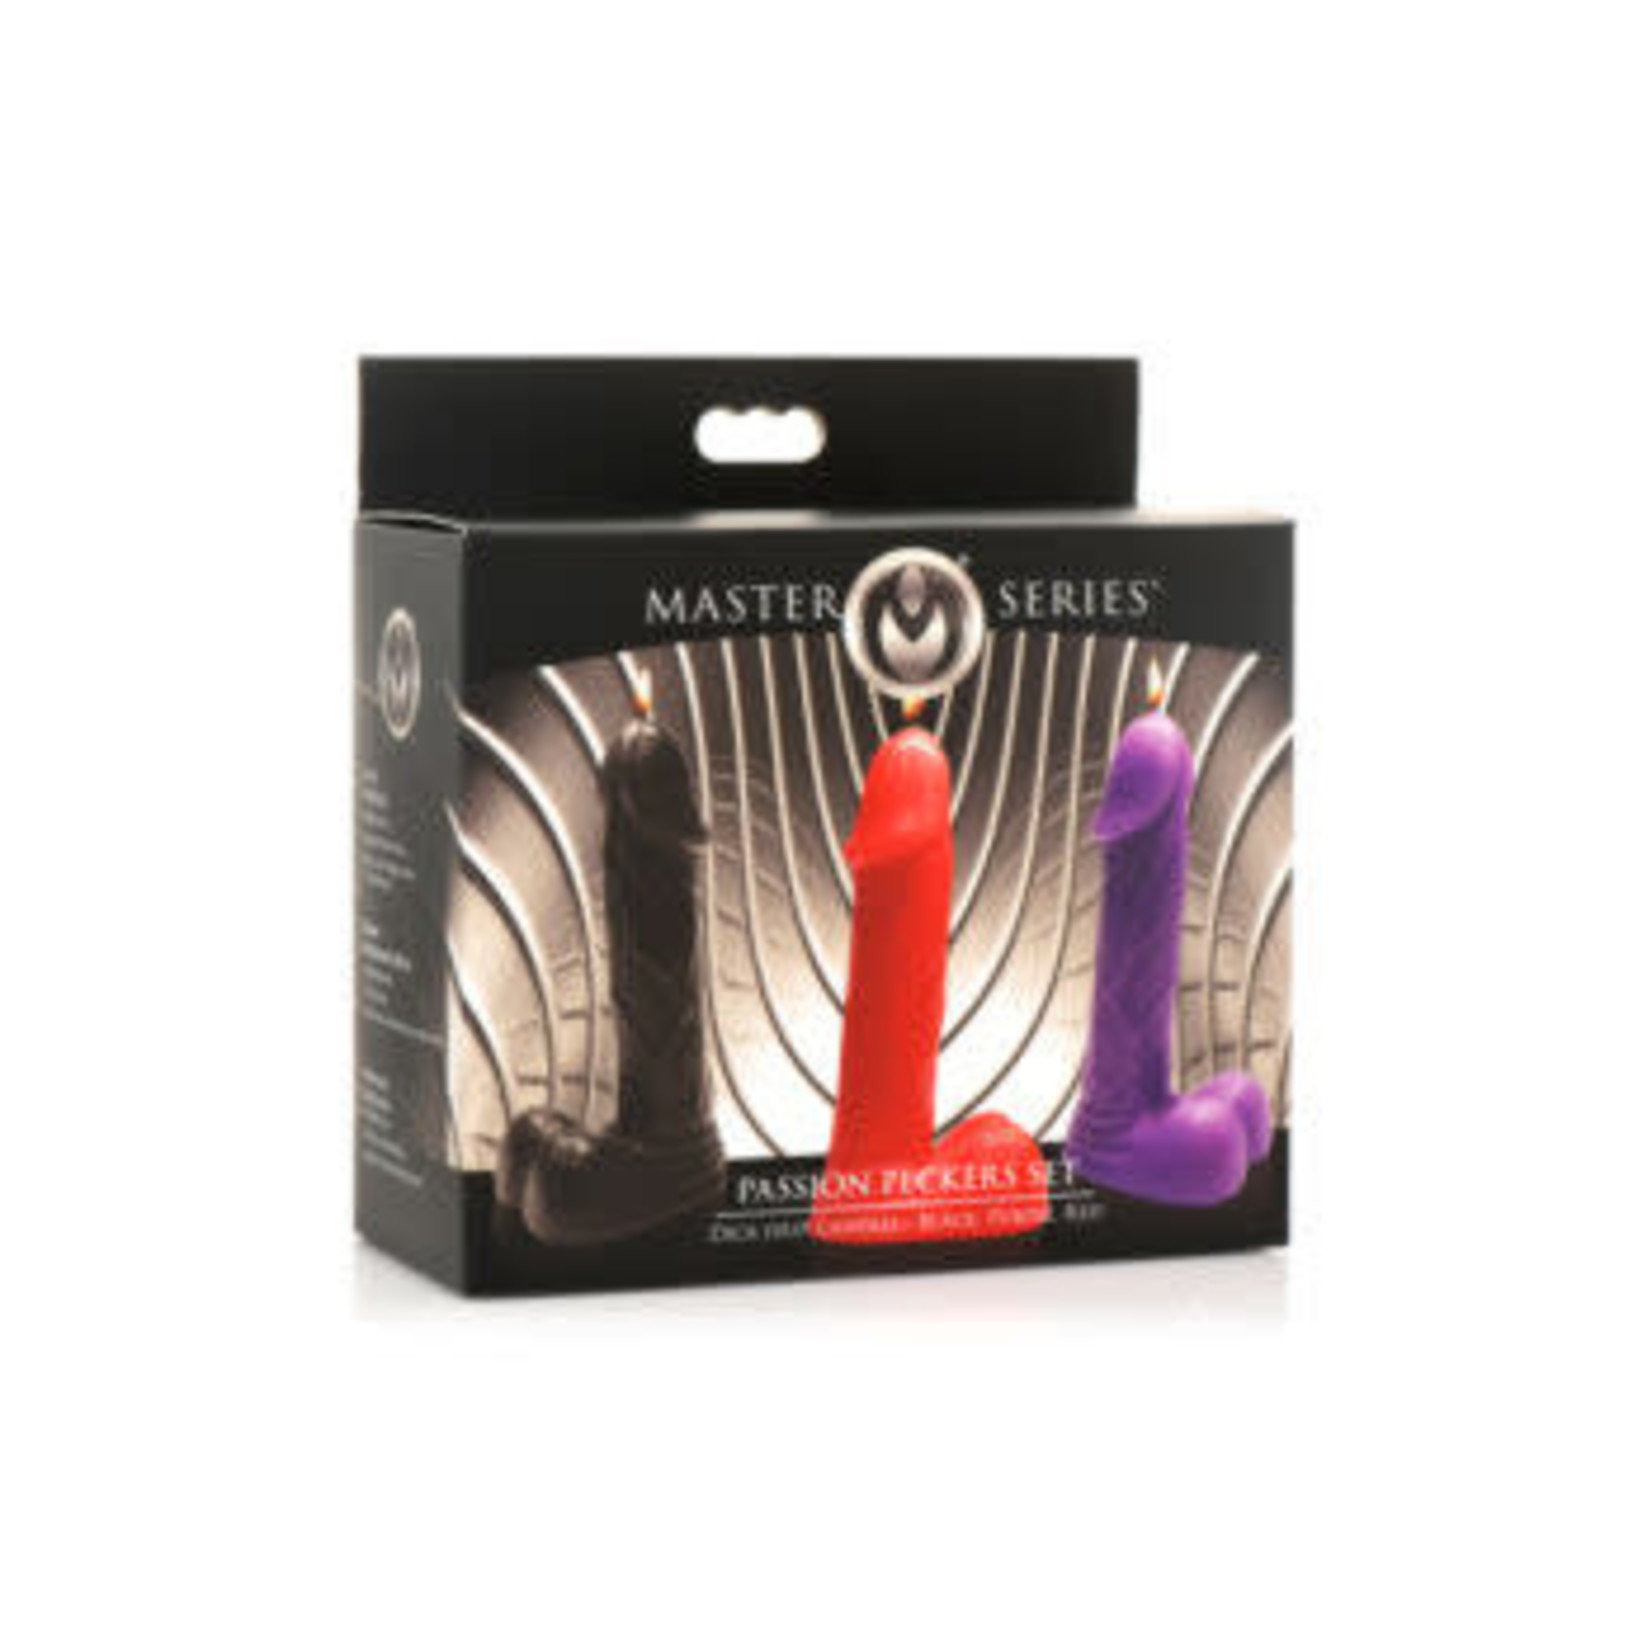 MASTER SERIES MASTER SERIES PASSION PECKERS DRIP CANDLE SET